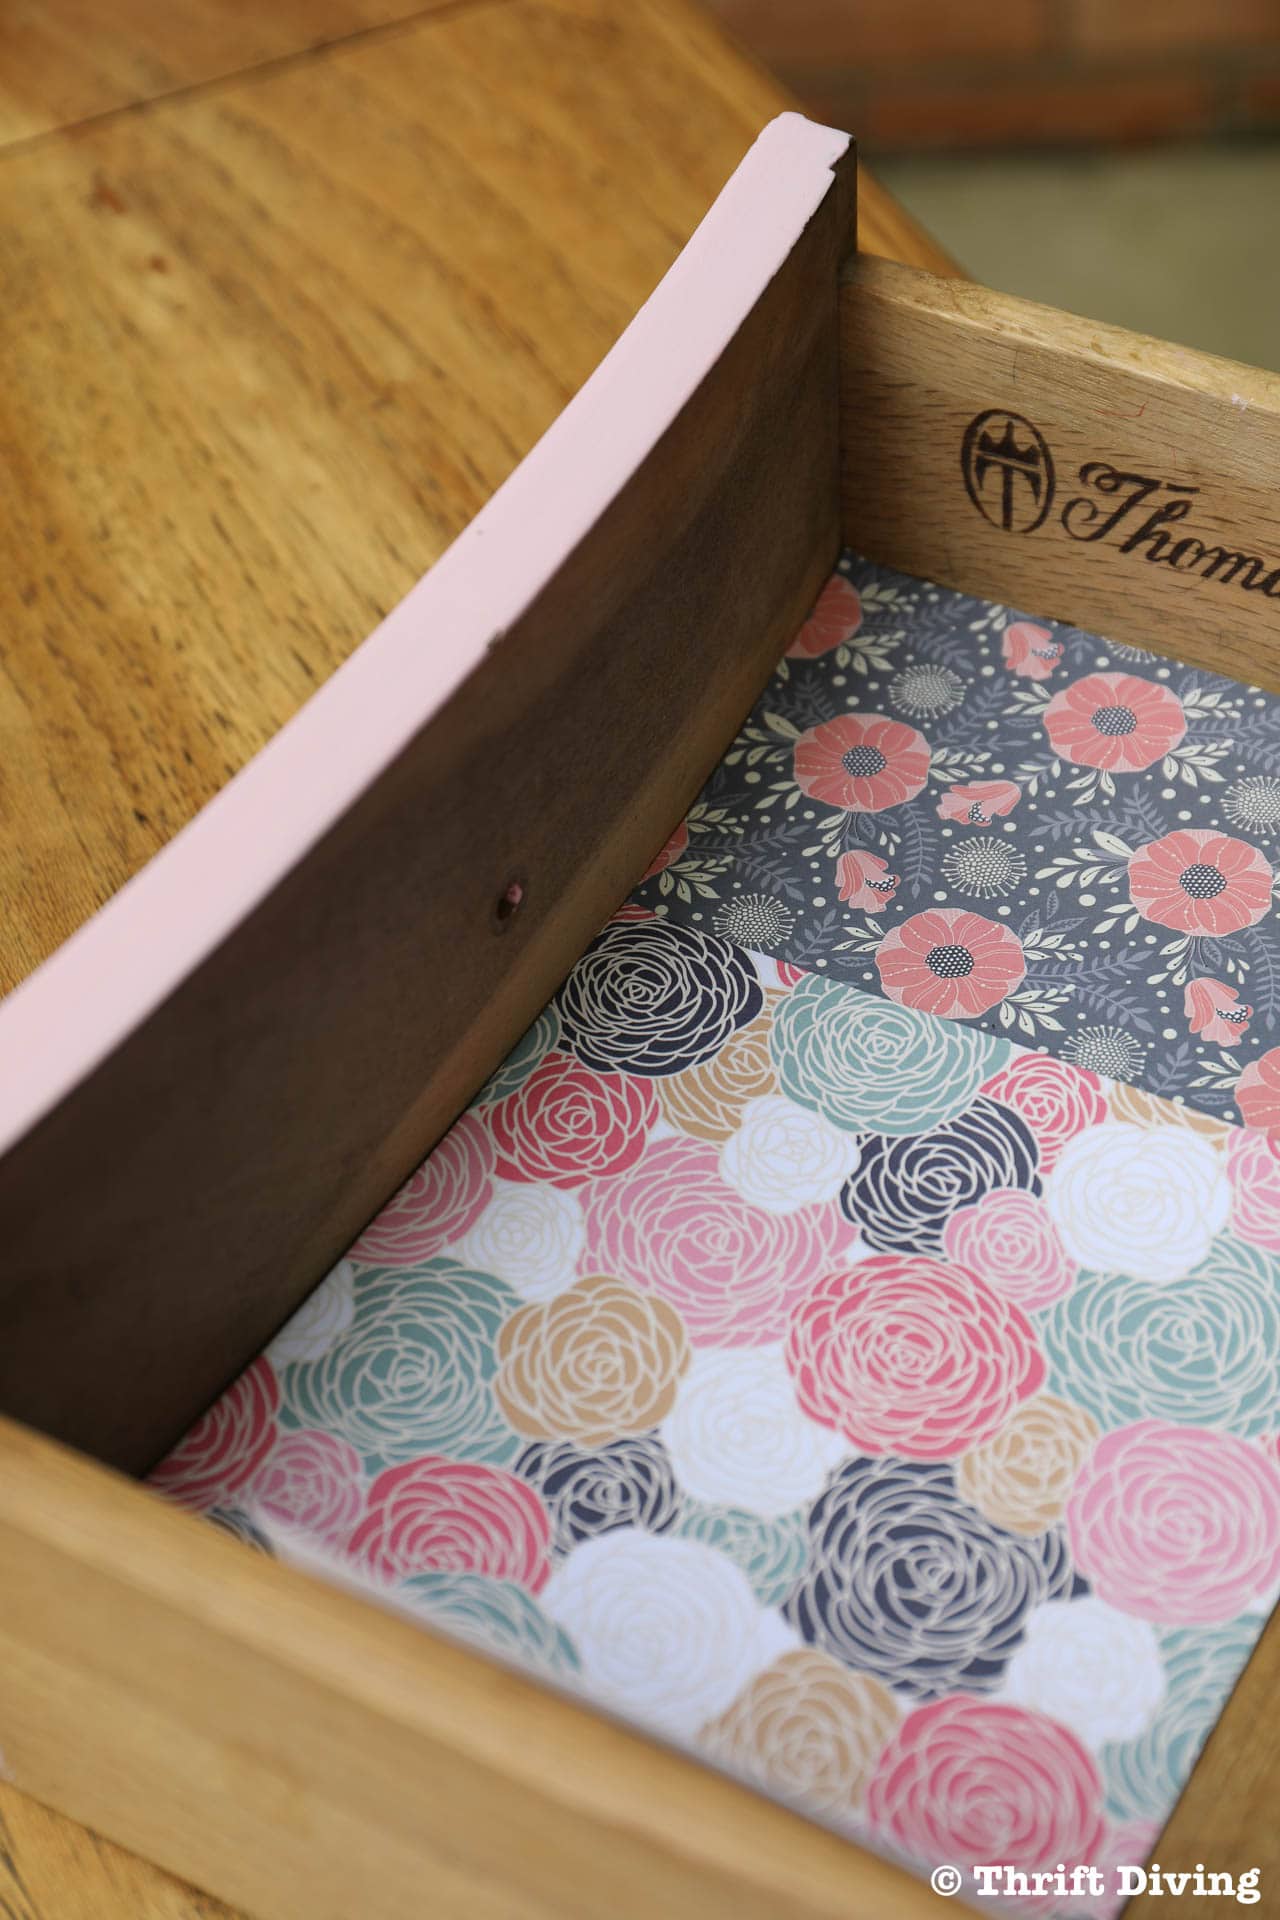 https://thriftdiving.com/wp-content/uploads/2018/05/How-to-Line-Drawers-with-Pretty-Scrapbook-Paper-Trim-paper-to-fit-curves-Thrift-Diving.jpg